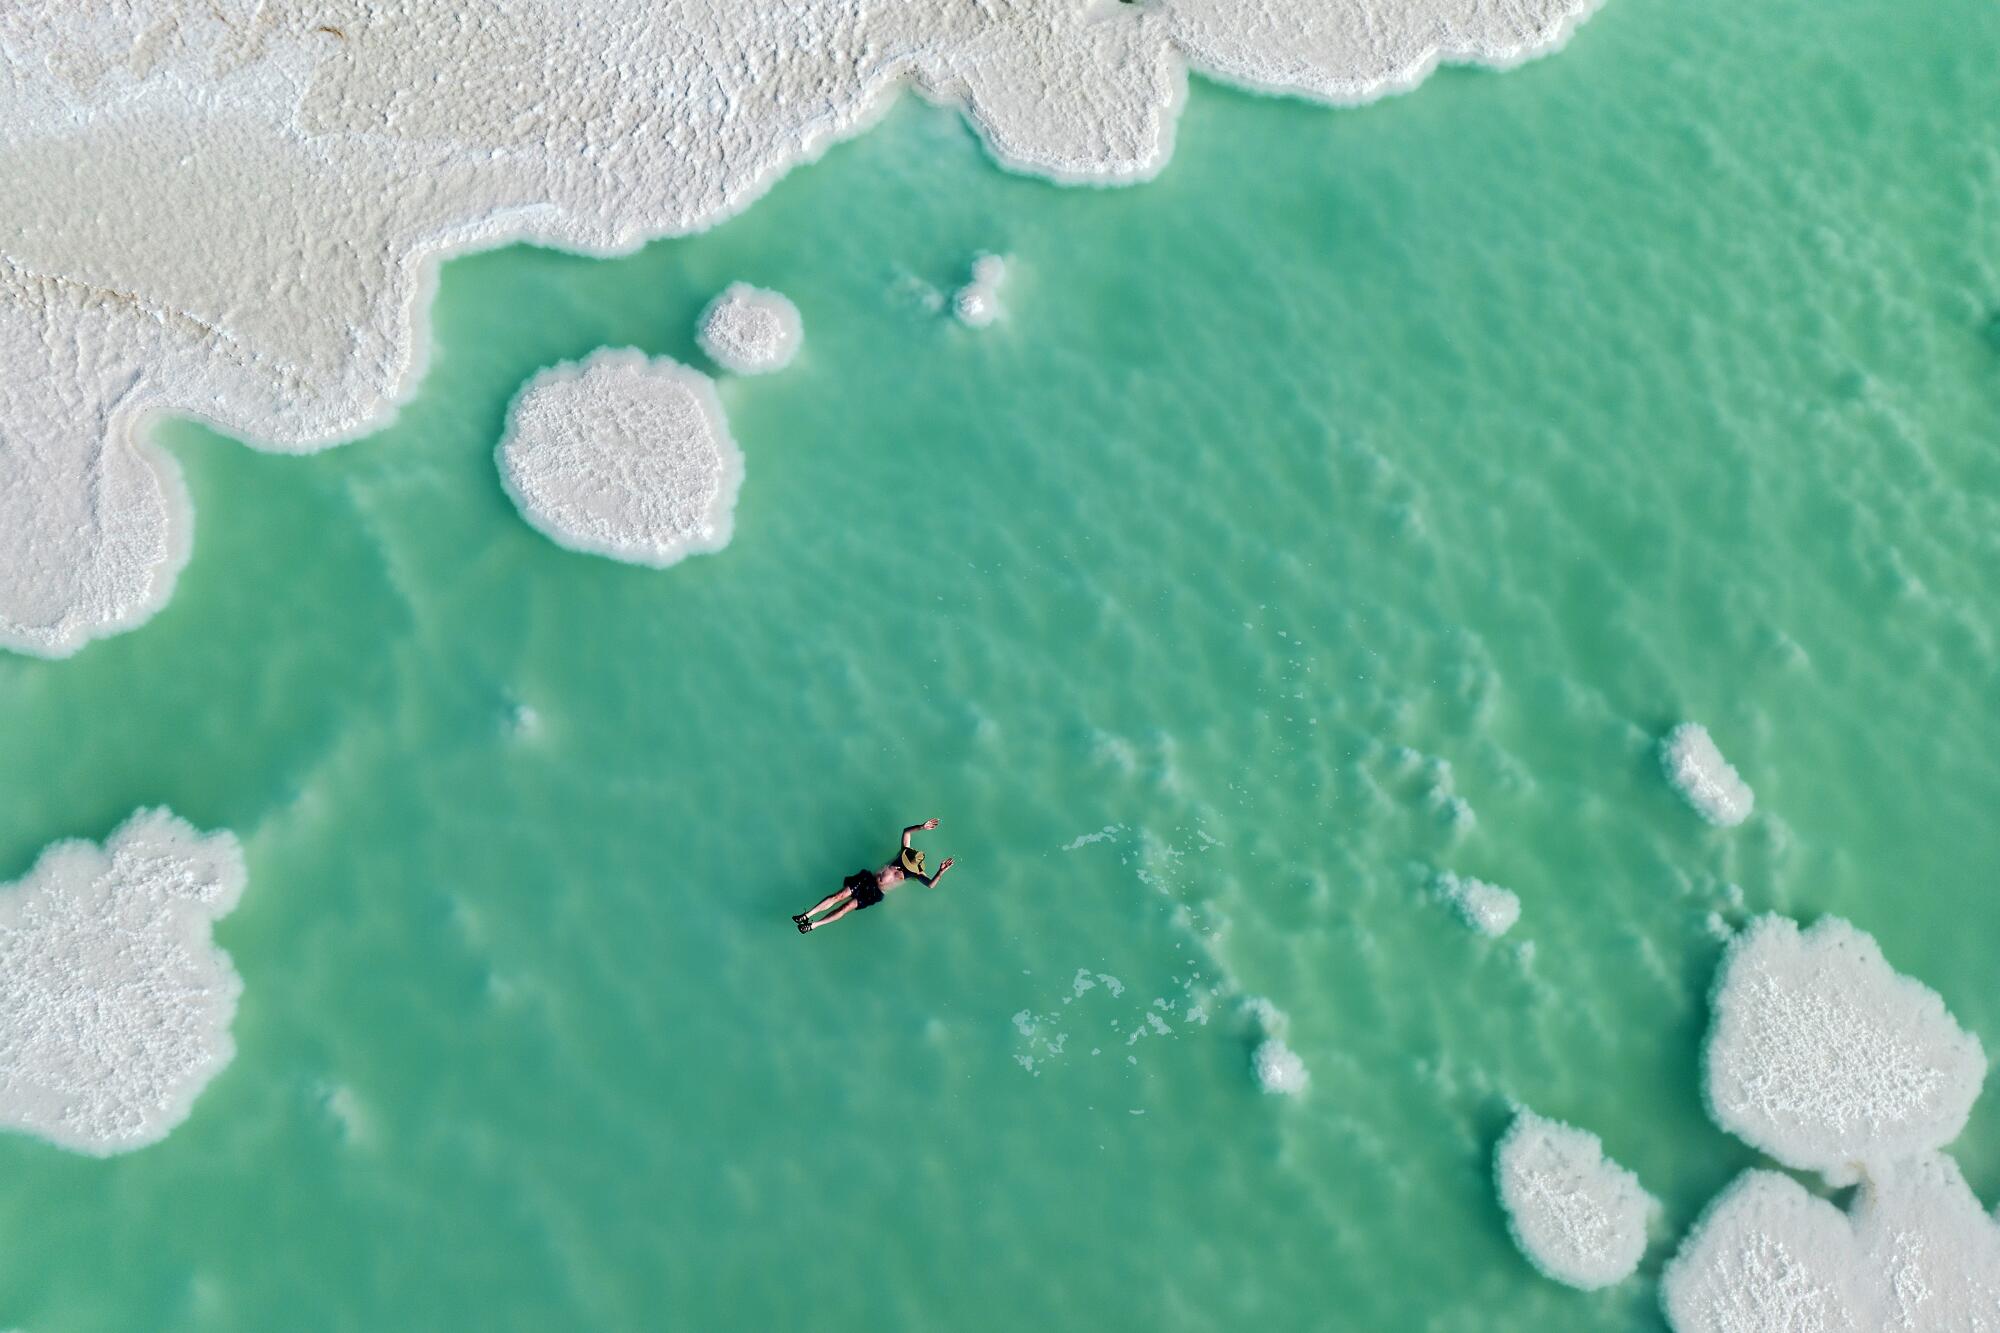 A drone photo showing a man floating in a vast, green-tinted body of water.